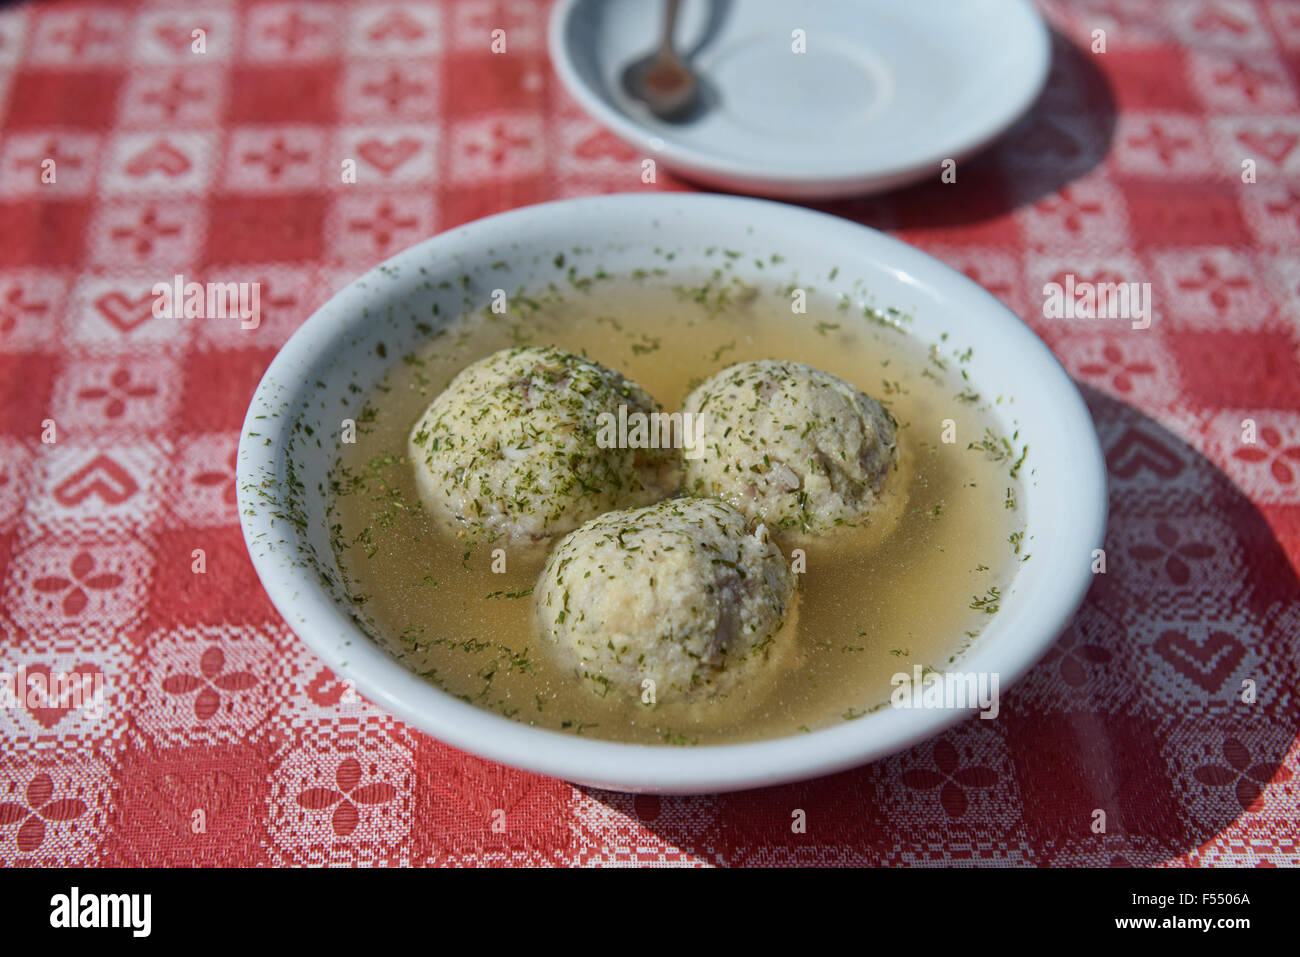 Canderli (knödel), a bread dumpling soup, specialty of the Tyrol region of Italy and Austria Stock Photo